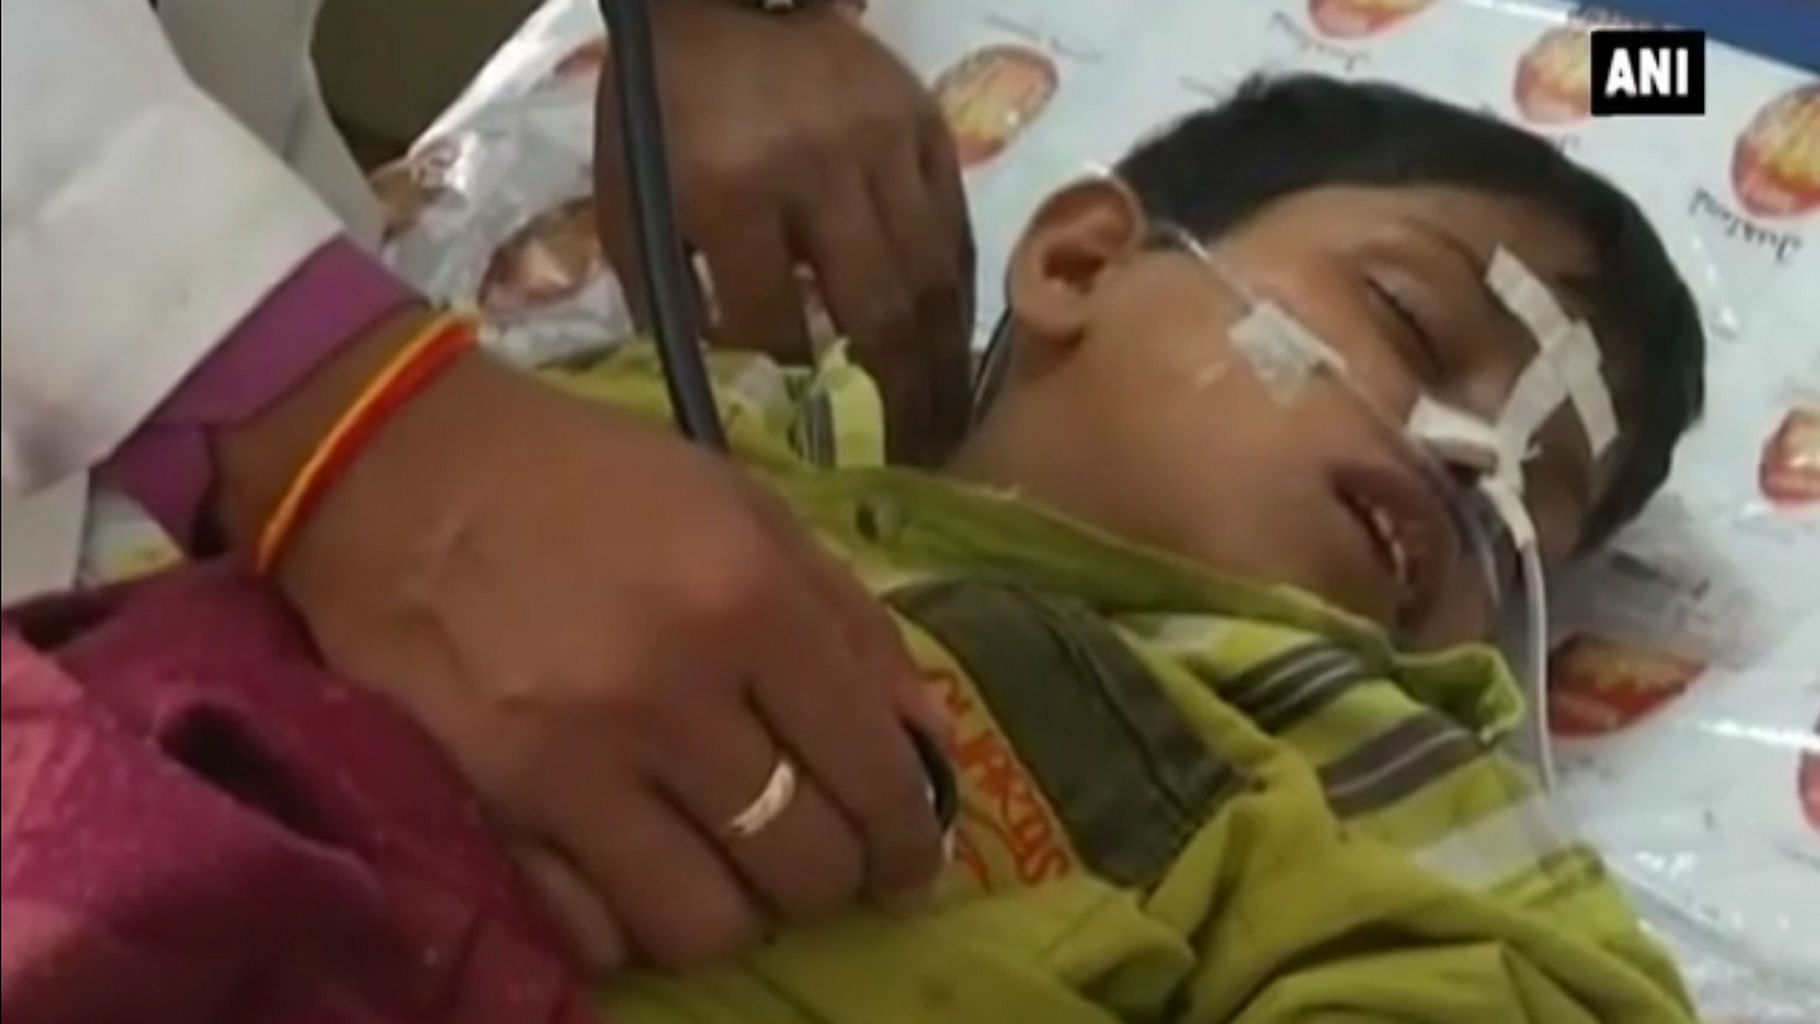 Children and elderly people are particularly vulnerable to the disease. (Photo: YouTube/<a href="https://www.youtube.com/channel/UCoRpKmC6a-DdEa1ohxlCgUA">ANI News Official</a>)